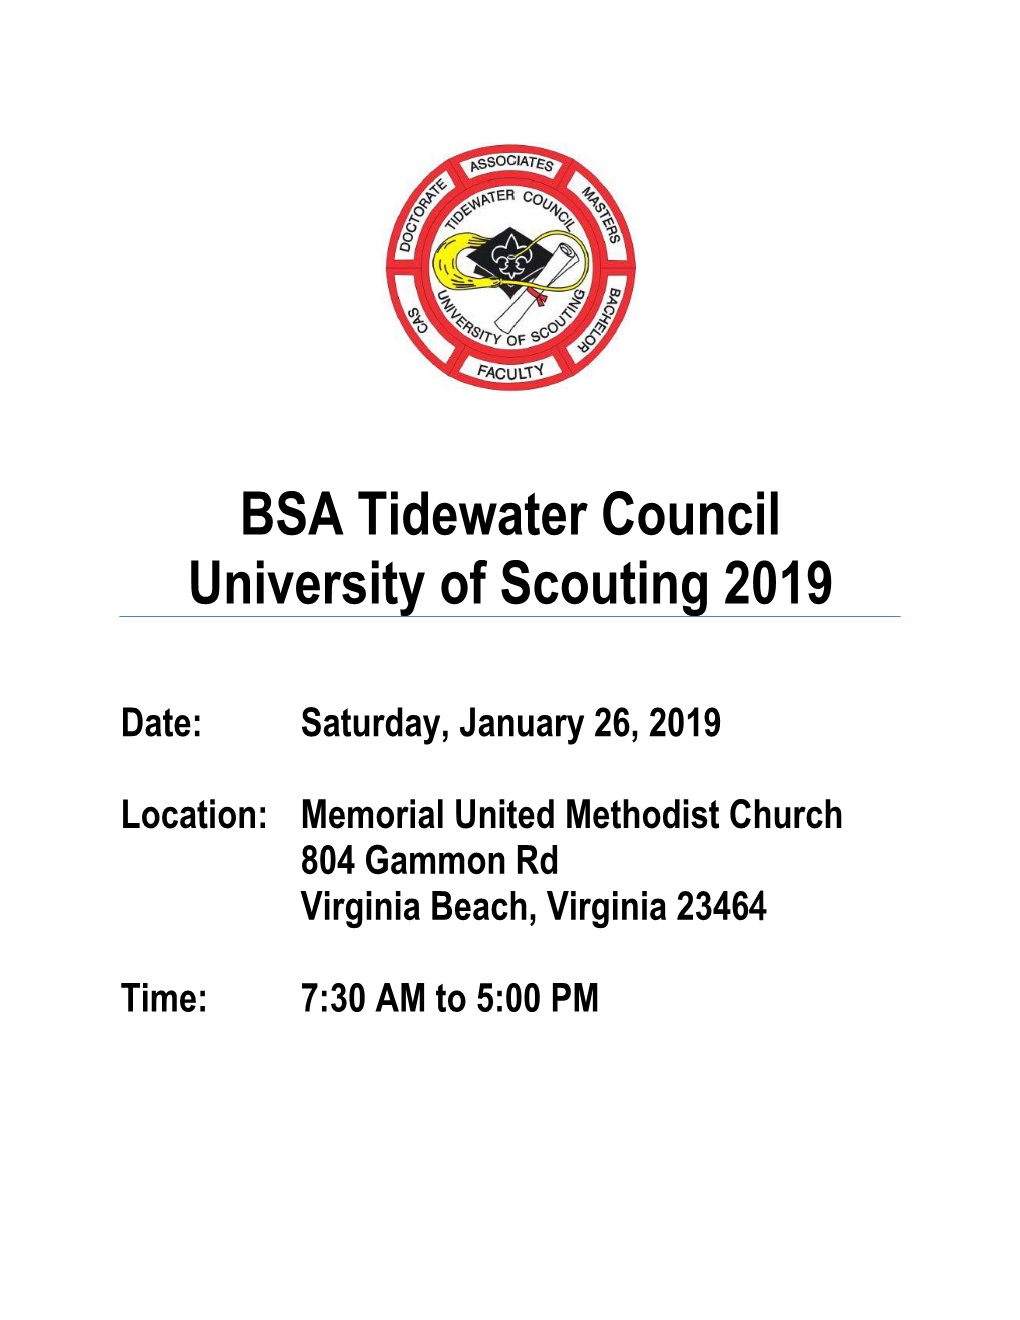 BSA Tidewater Council University of Scouting 2019